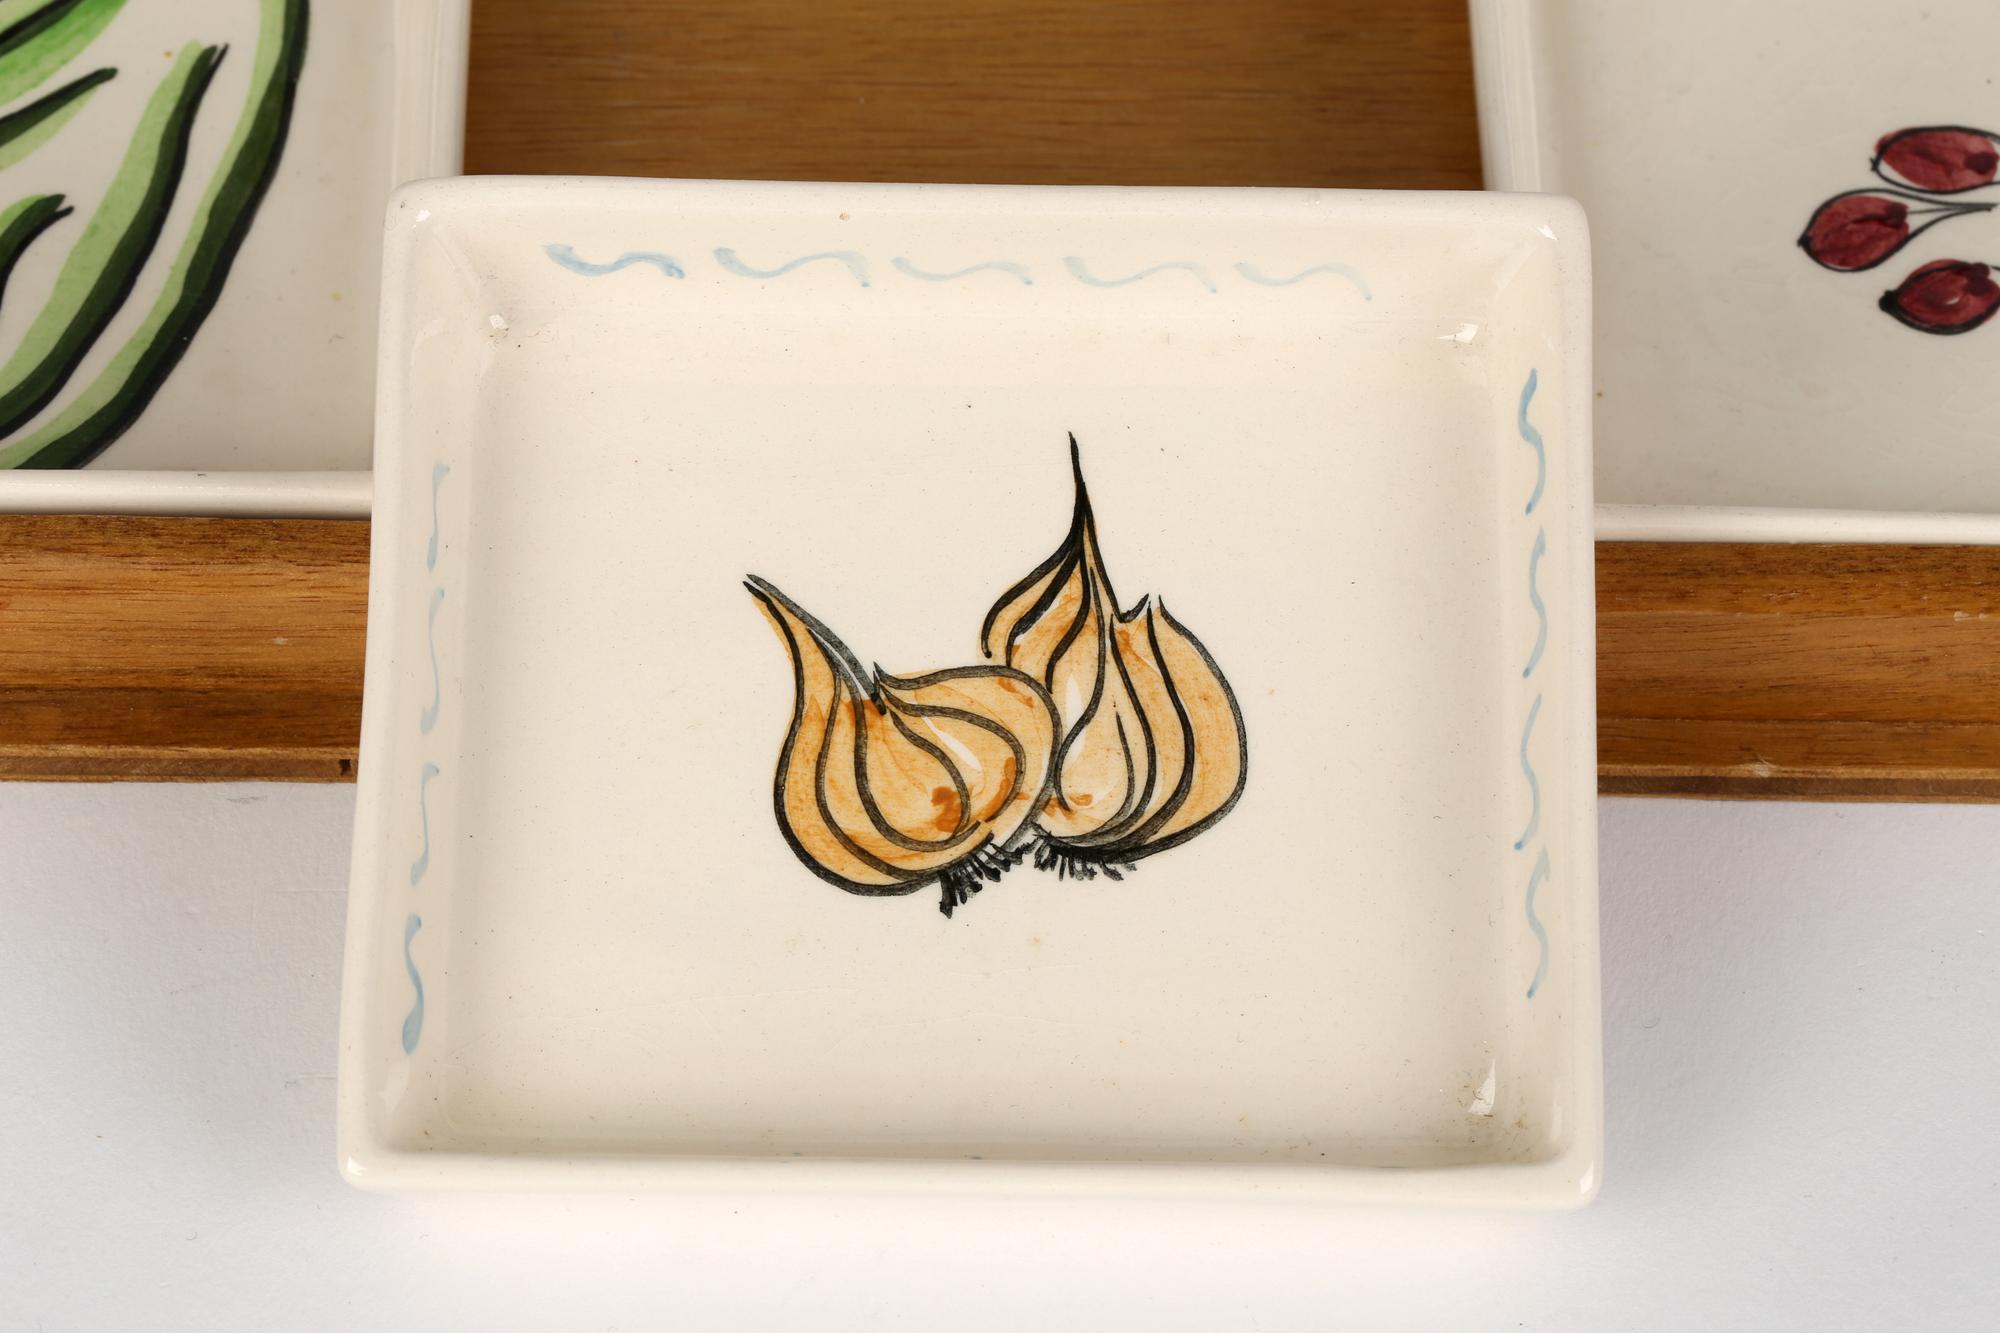 Hand-Painted Toni Raymond Mid-Century Pottery Serving Dishes on Fitted Tray For Sale